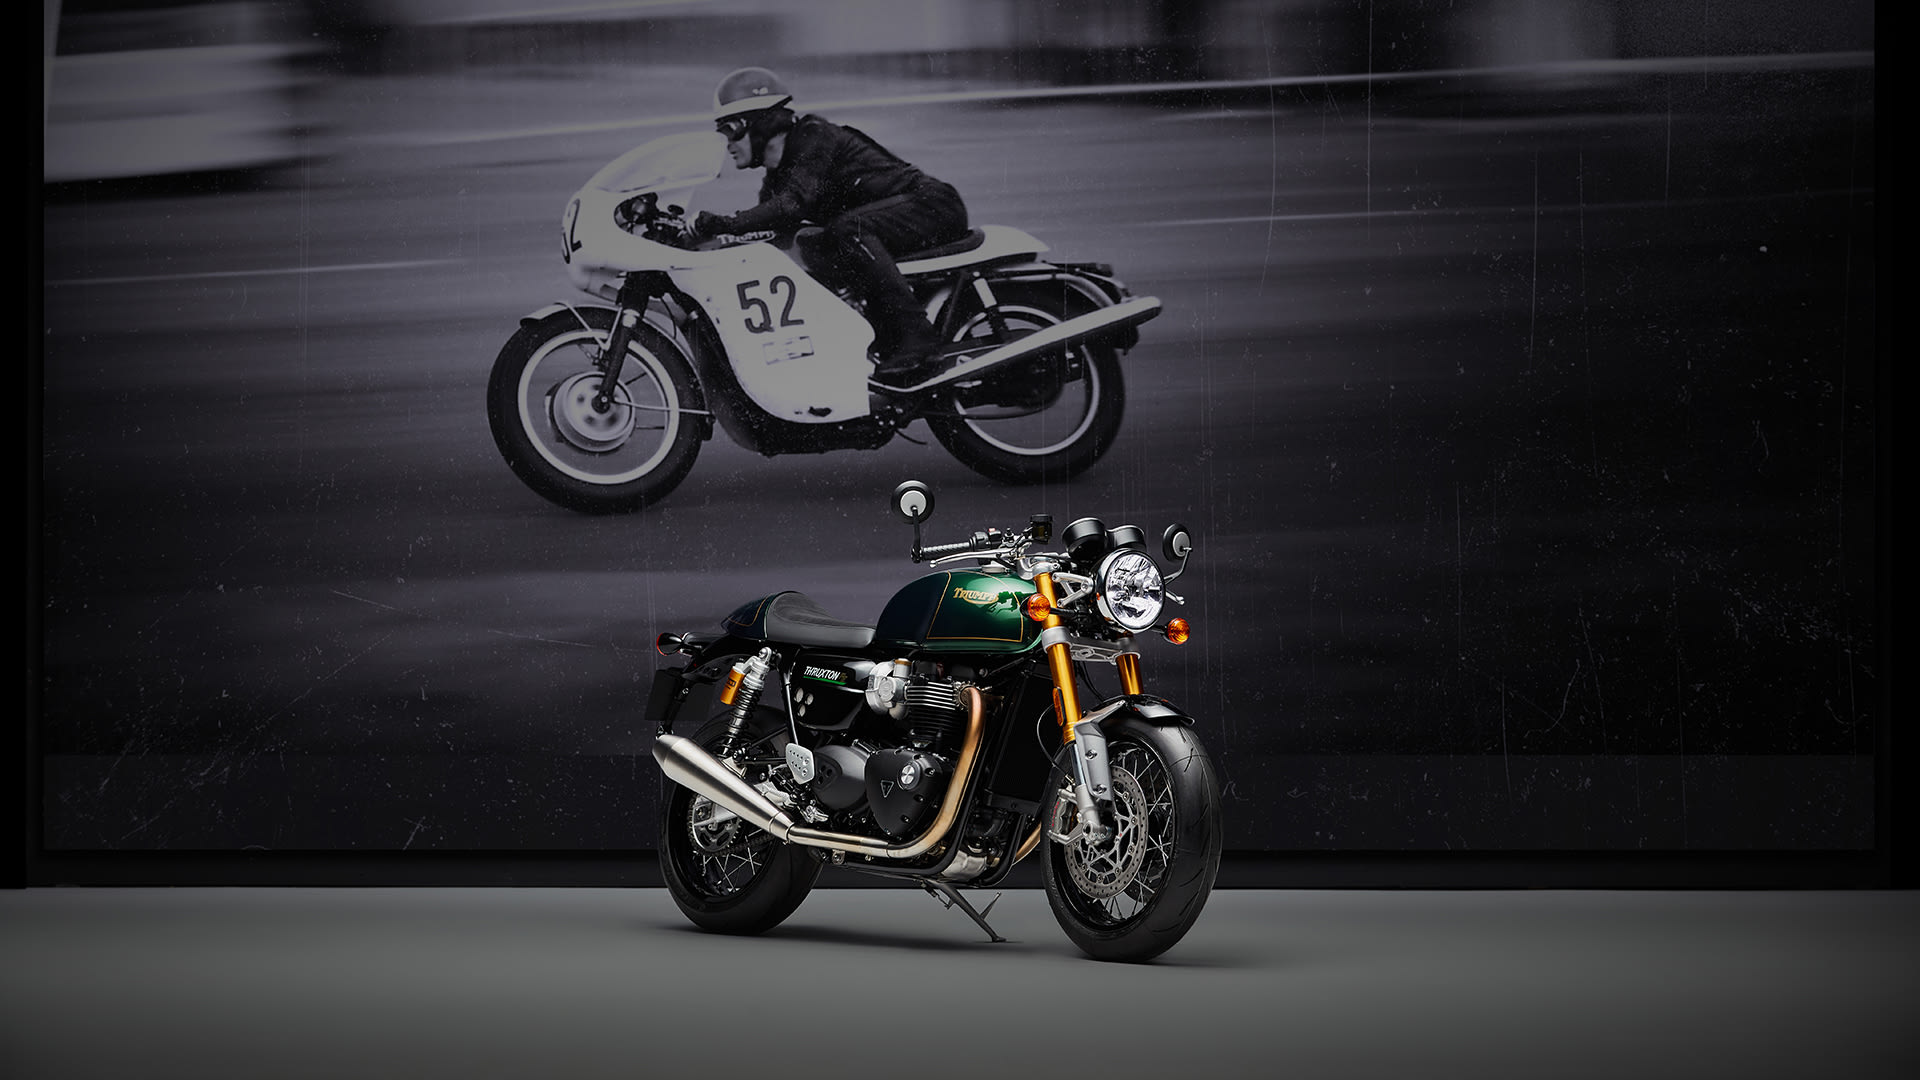 Triumph Thruxton Final Edition with Thruxton archive image in the background)